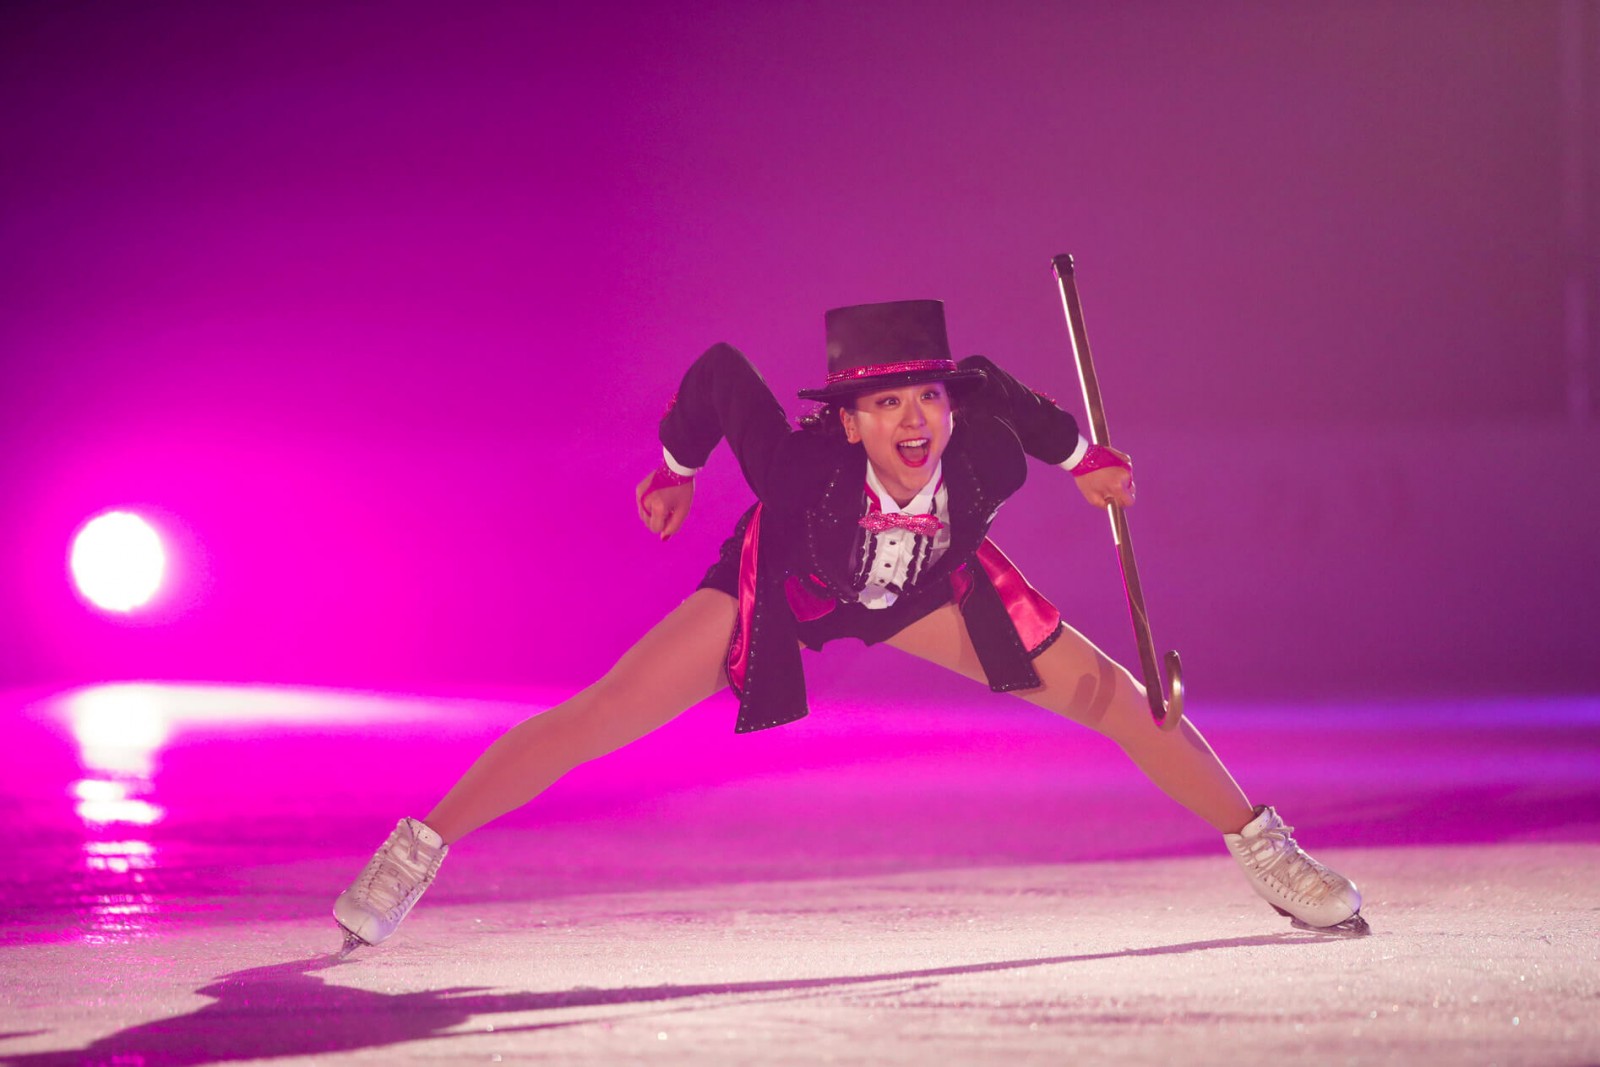 Performing in the Thanks Tour of over 200 ice shows at 50 venues, held over three years between May 2018 and September 2020.